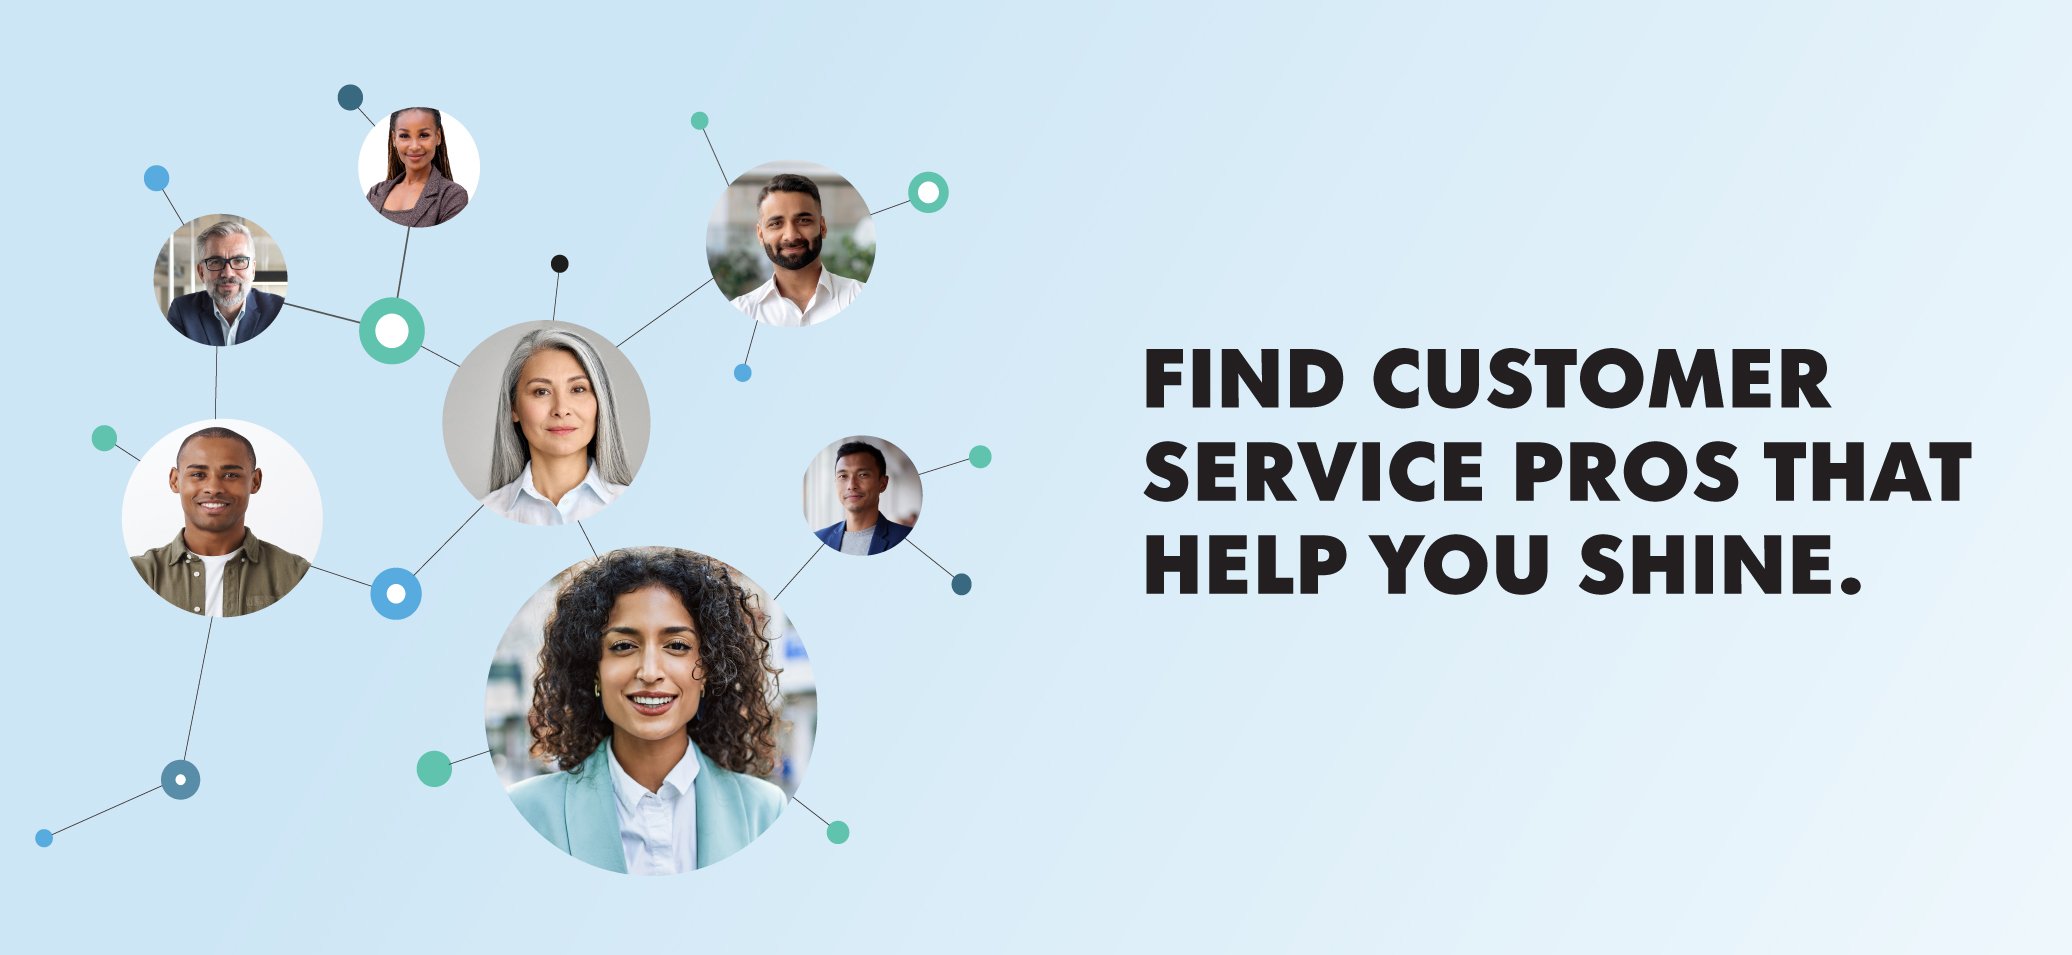 Find customer service pros that help you shine